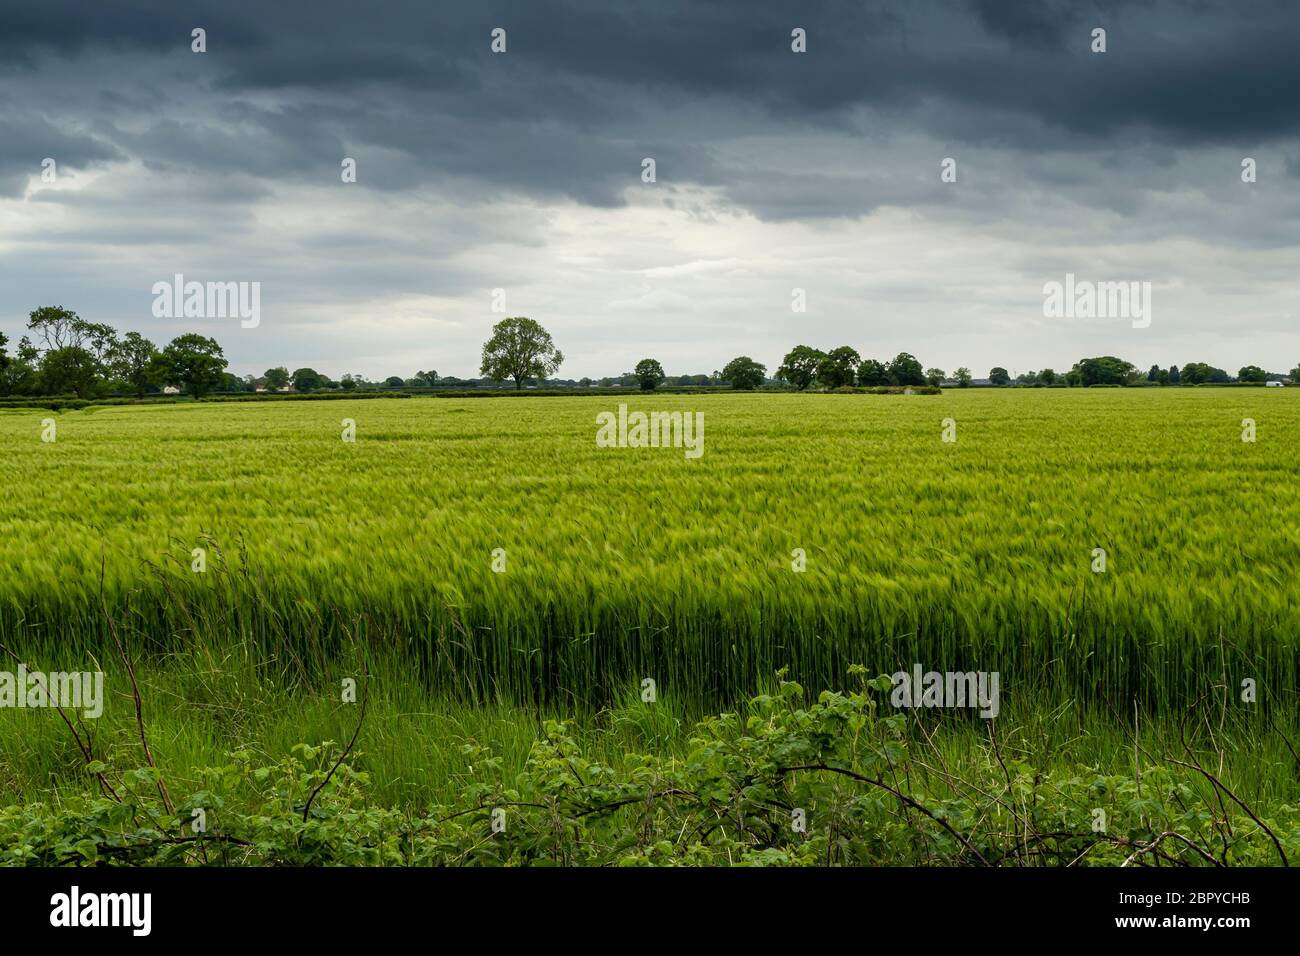 View over a field with green wheat on a breezy day with distant trees and a cloudy sky in North Yorkshire, England Stock Photo